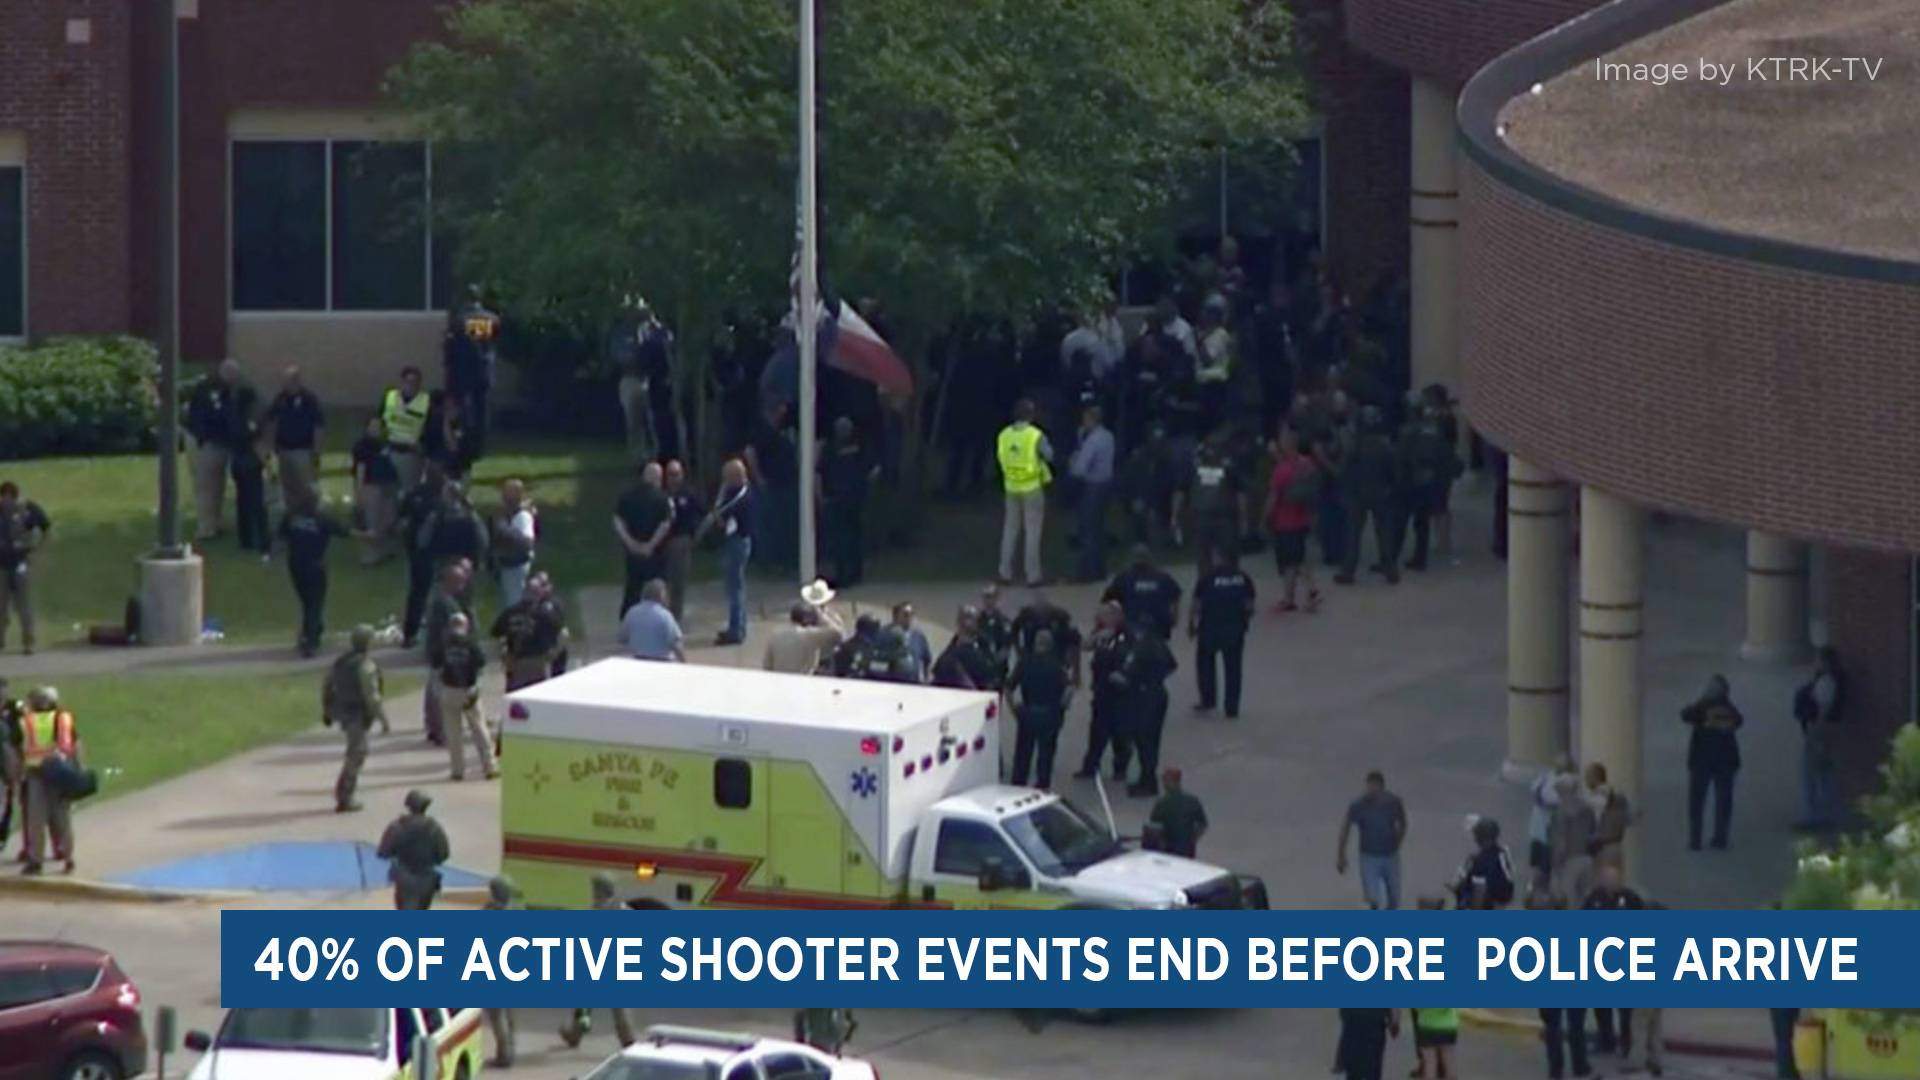 40% of active shooter events end before police arrive - image of school with police outside